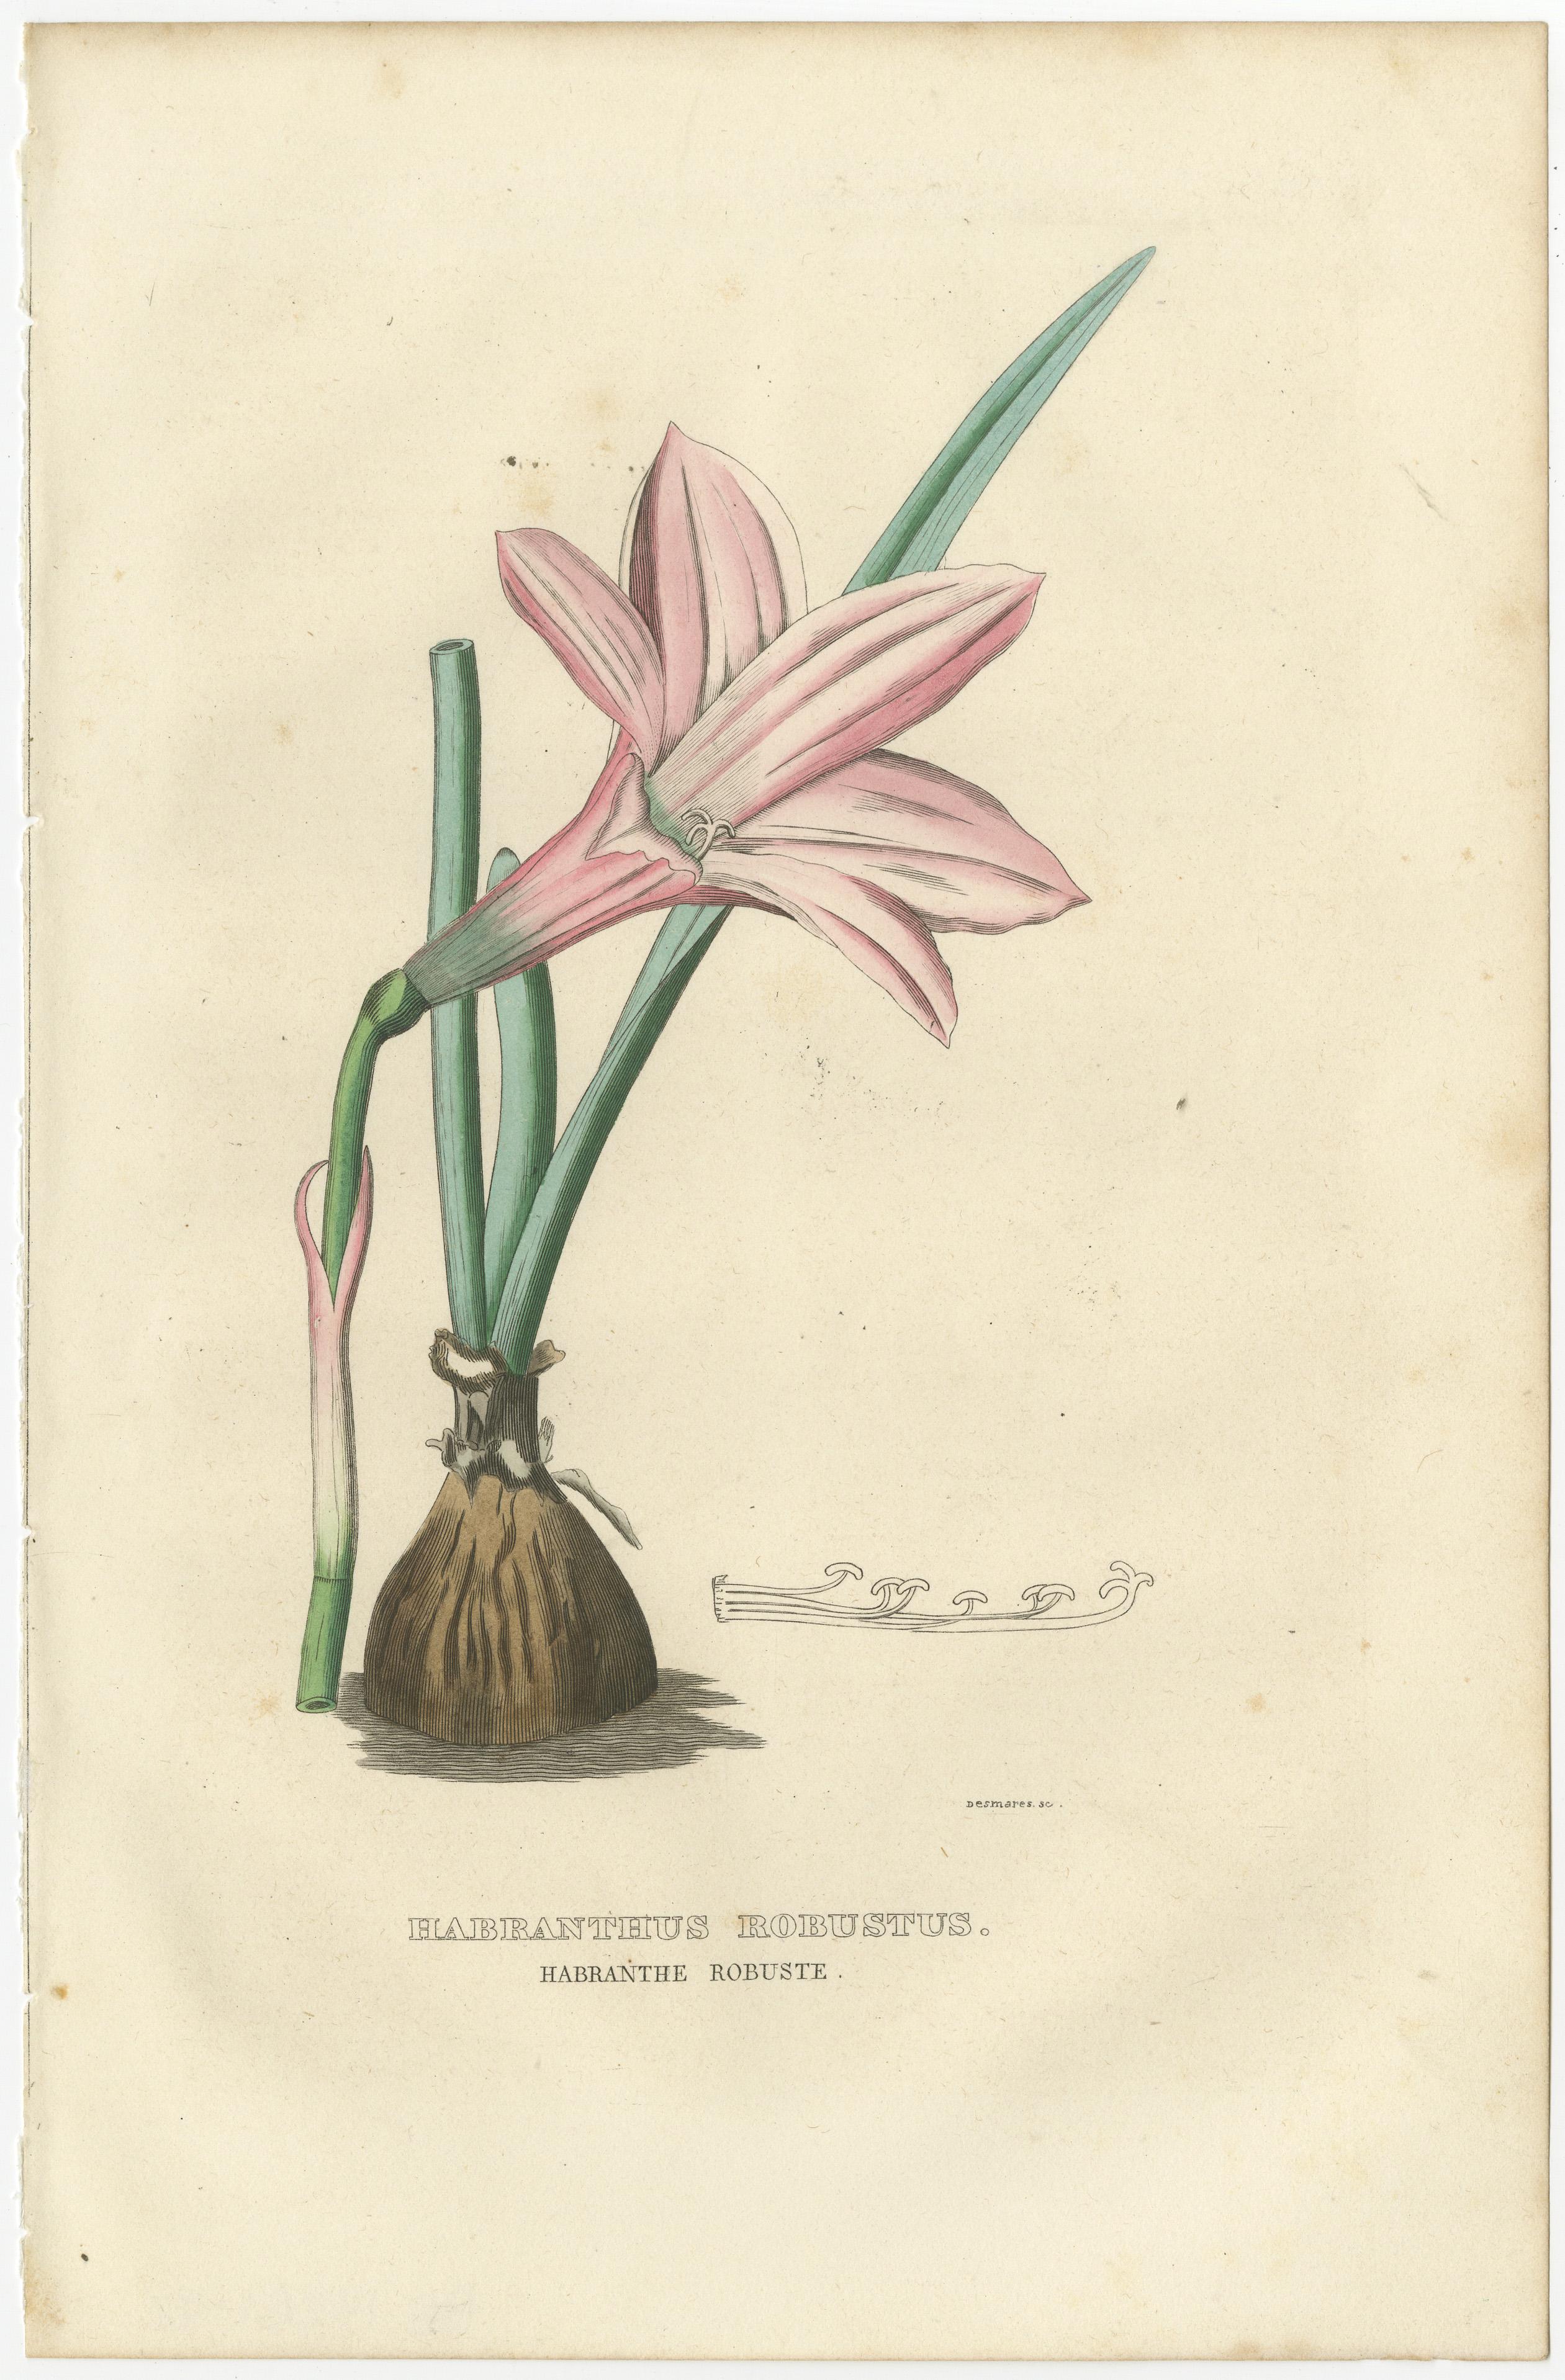 These hand-colored engravings are delicate illustrations of select flora from the 'Dictionnaire Classique des Sciences Naturelles' by Pierre Auguste Joseph Drapiez, published in Brussels in 1845. This volume is a significant accumulation of natural